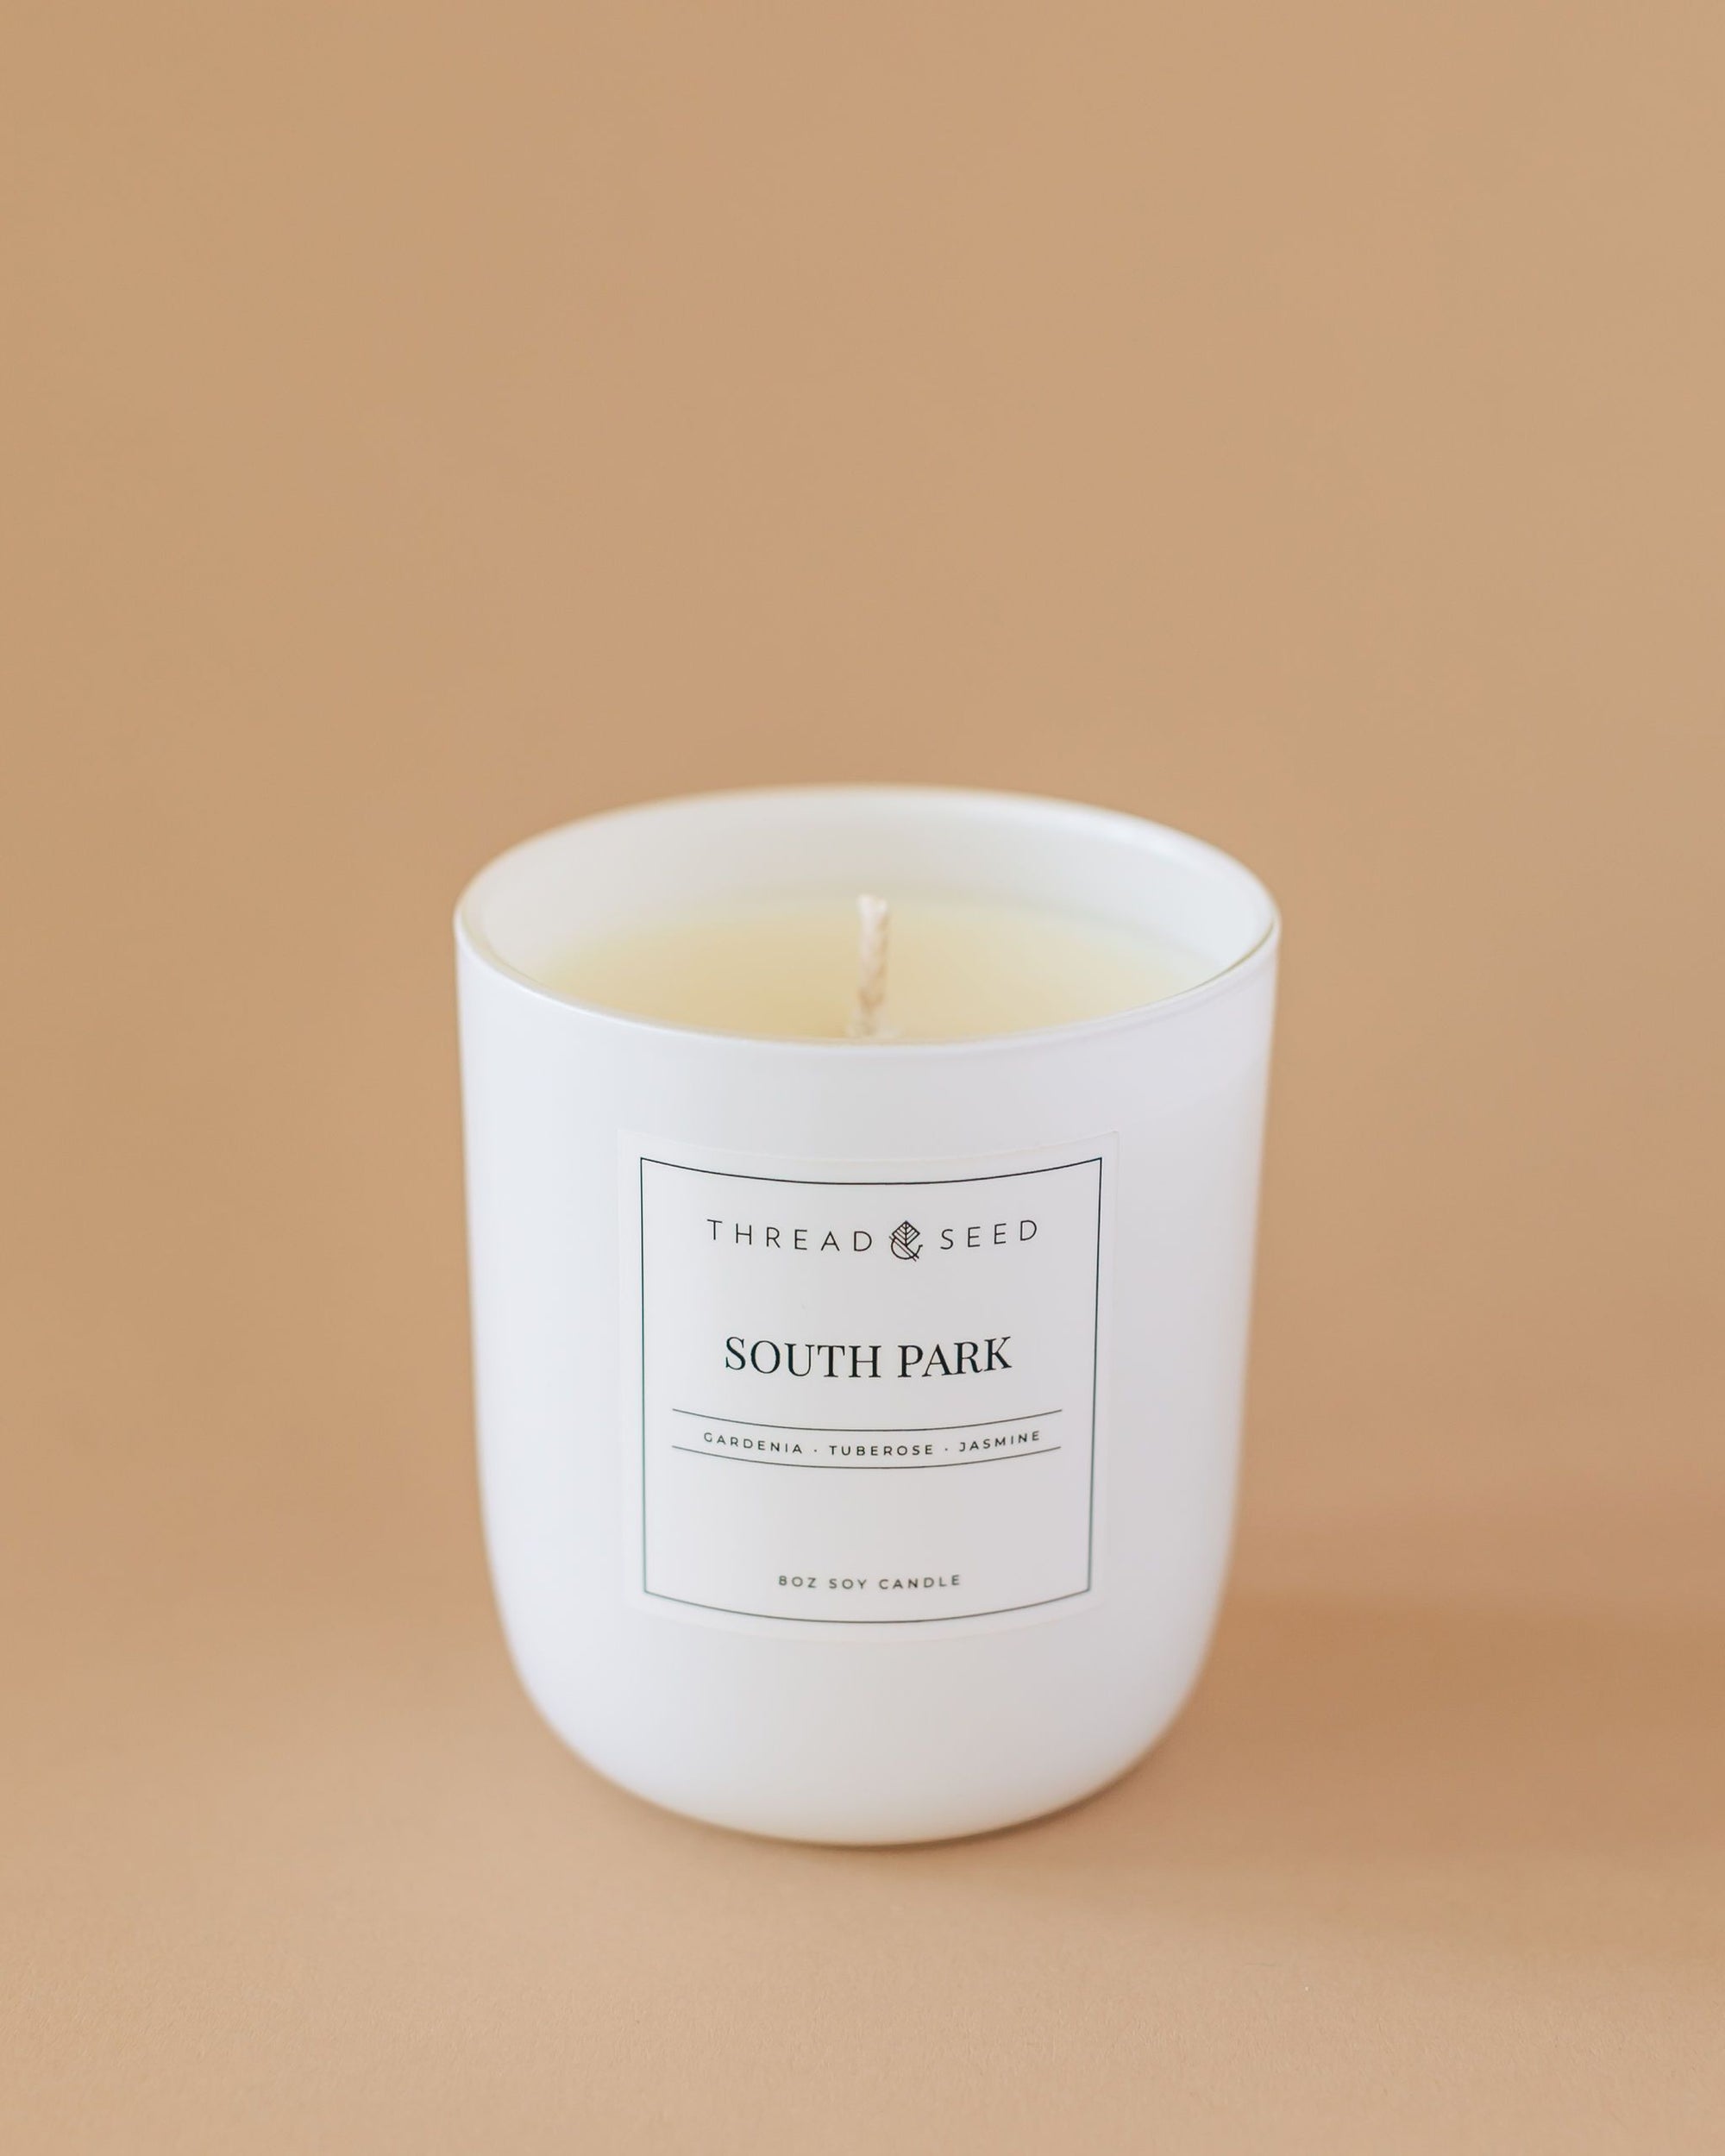 The South Park Soy Candle by Thread + Seed